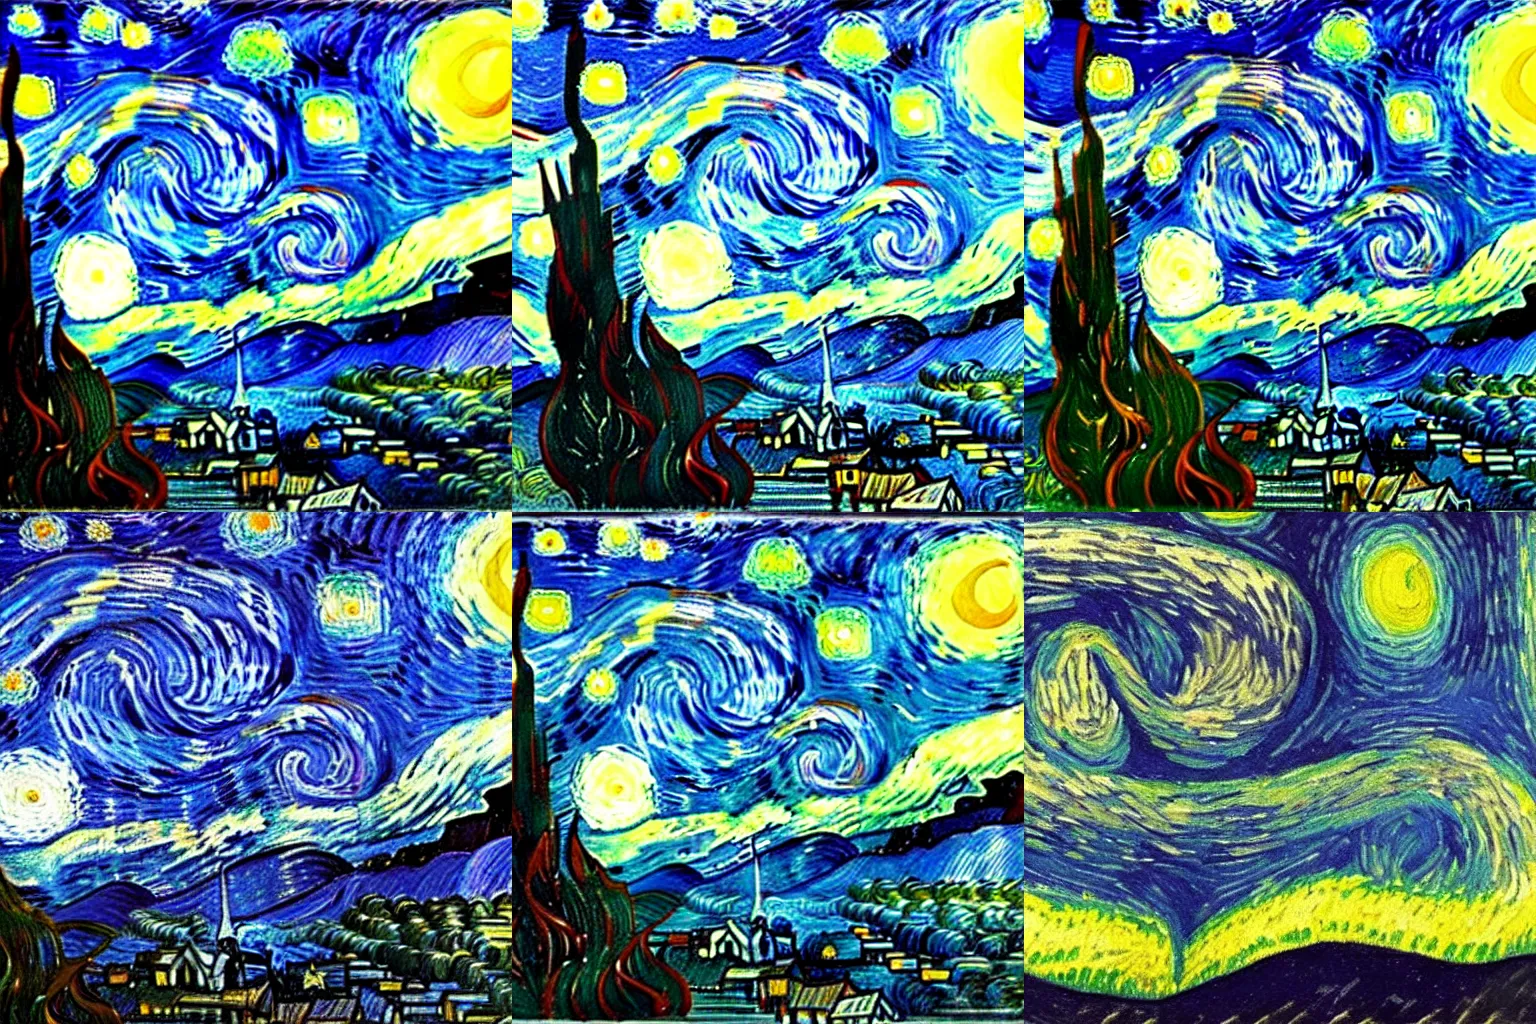 Prompt: the Milky Way galaxy by Vincent Van Gogh